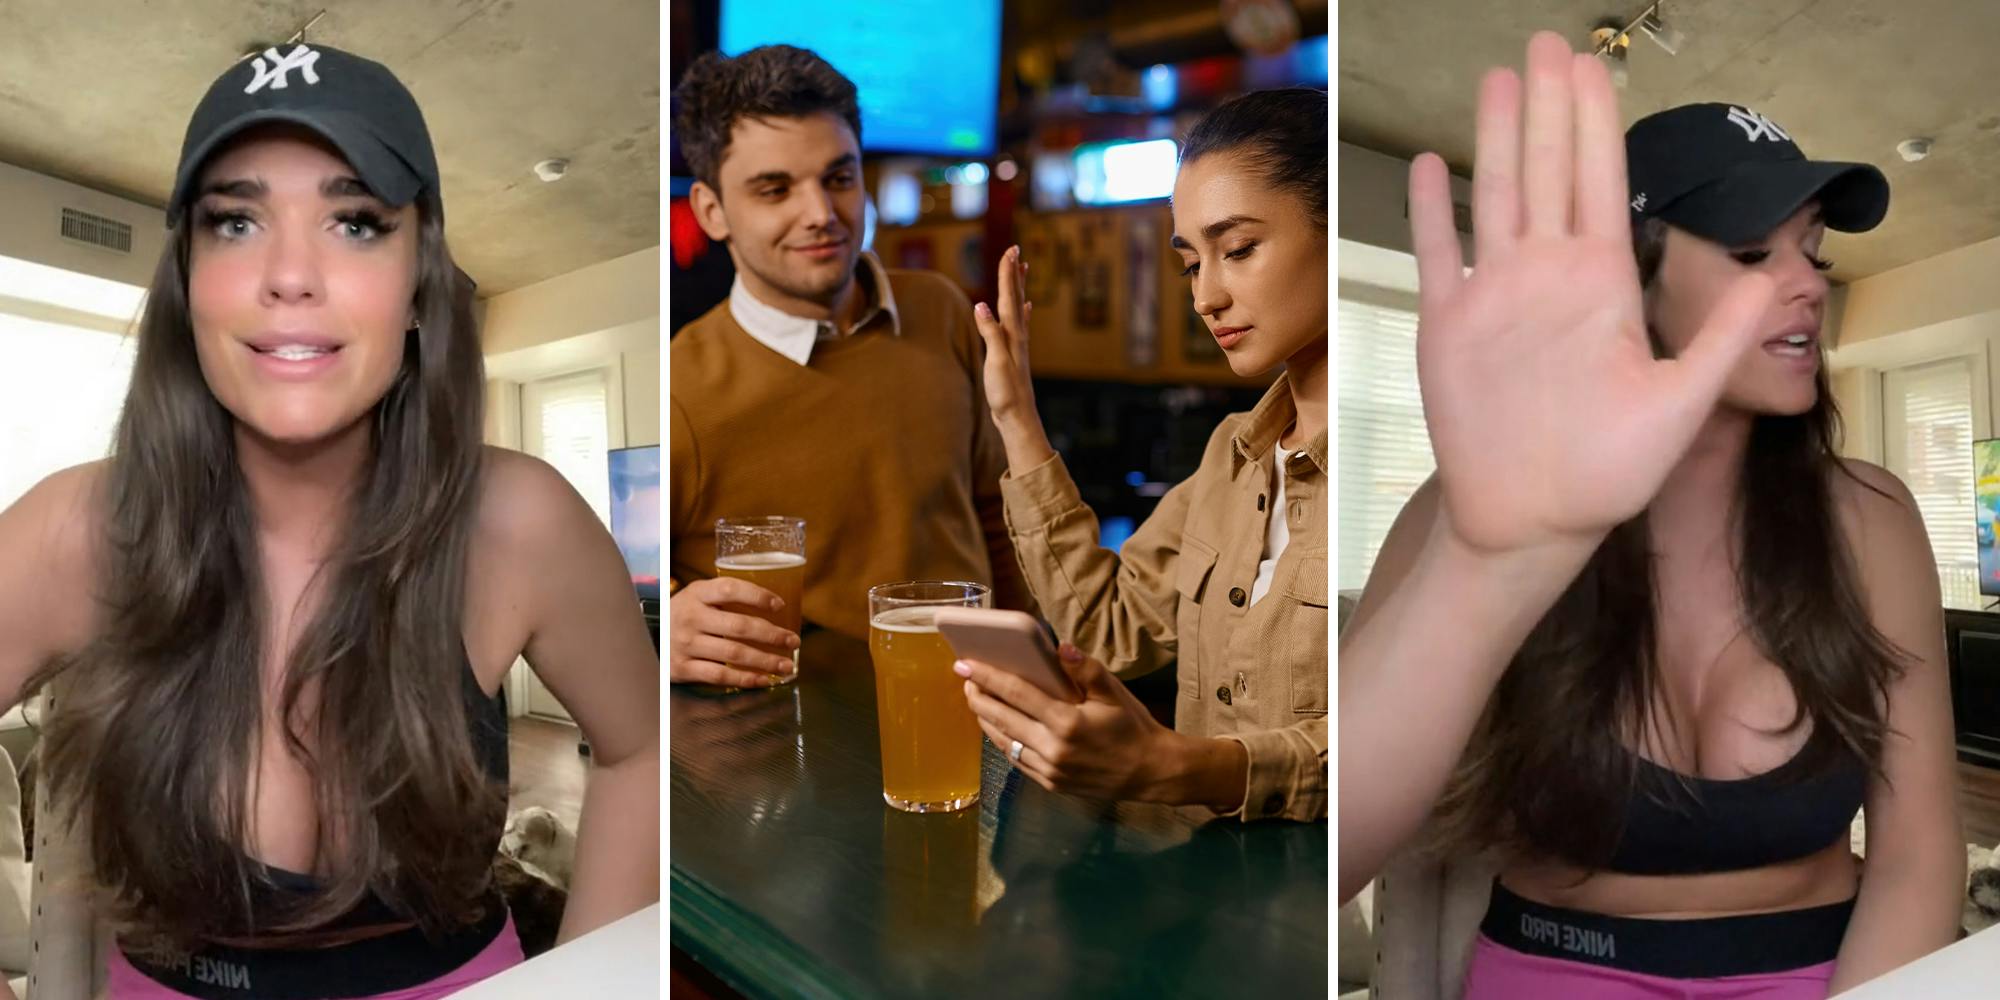 A bartender ends a bad first date with a lighthearted trick